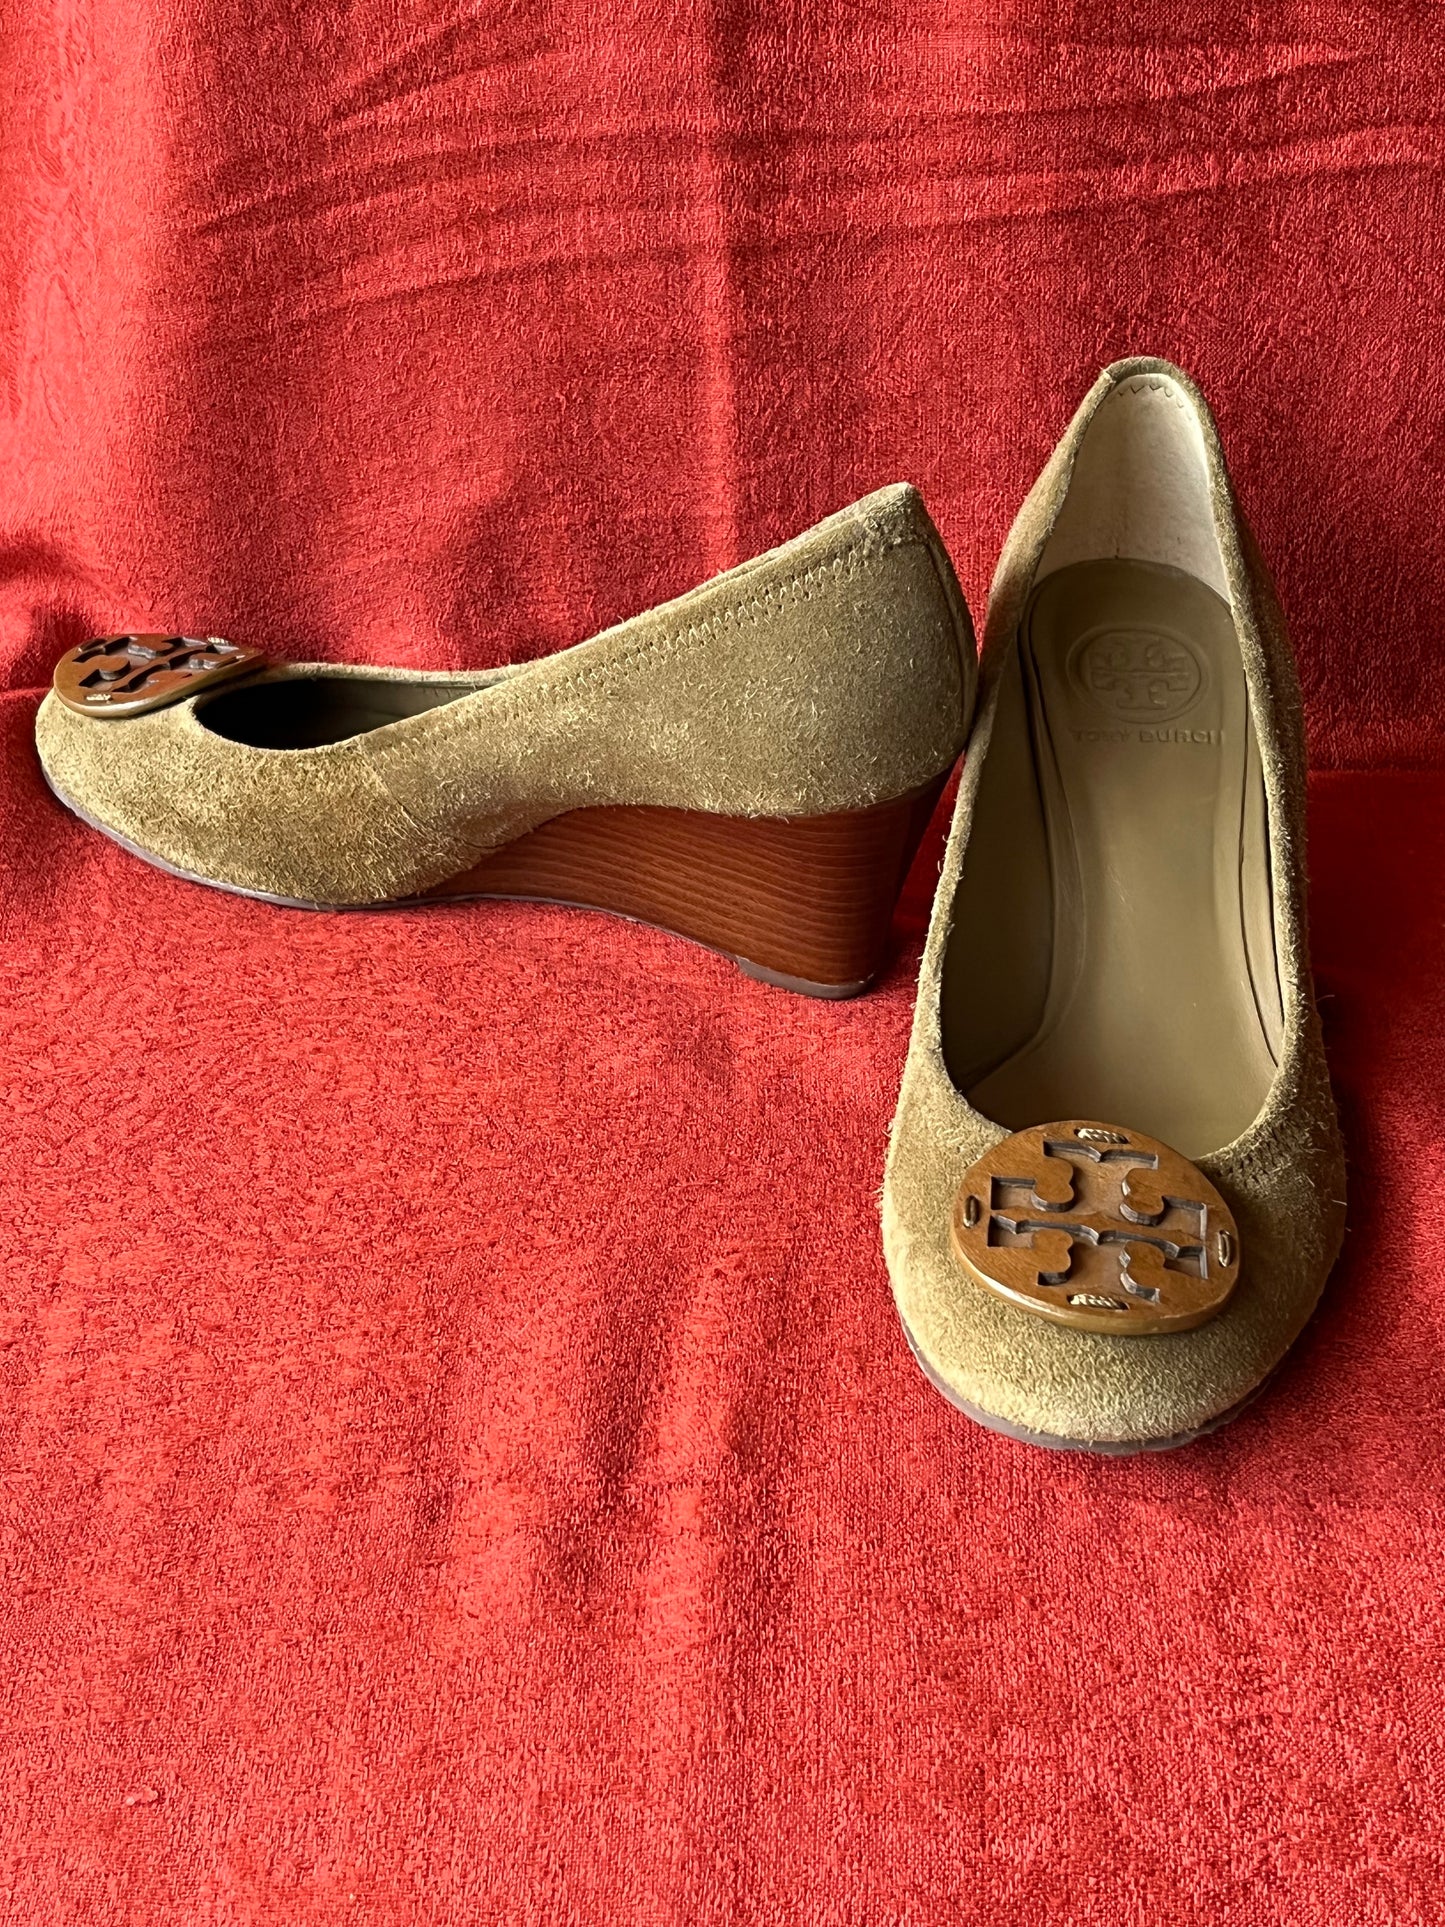 Tory Burch Suede Wedge Heel with Wooden Logo-Size 8M